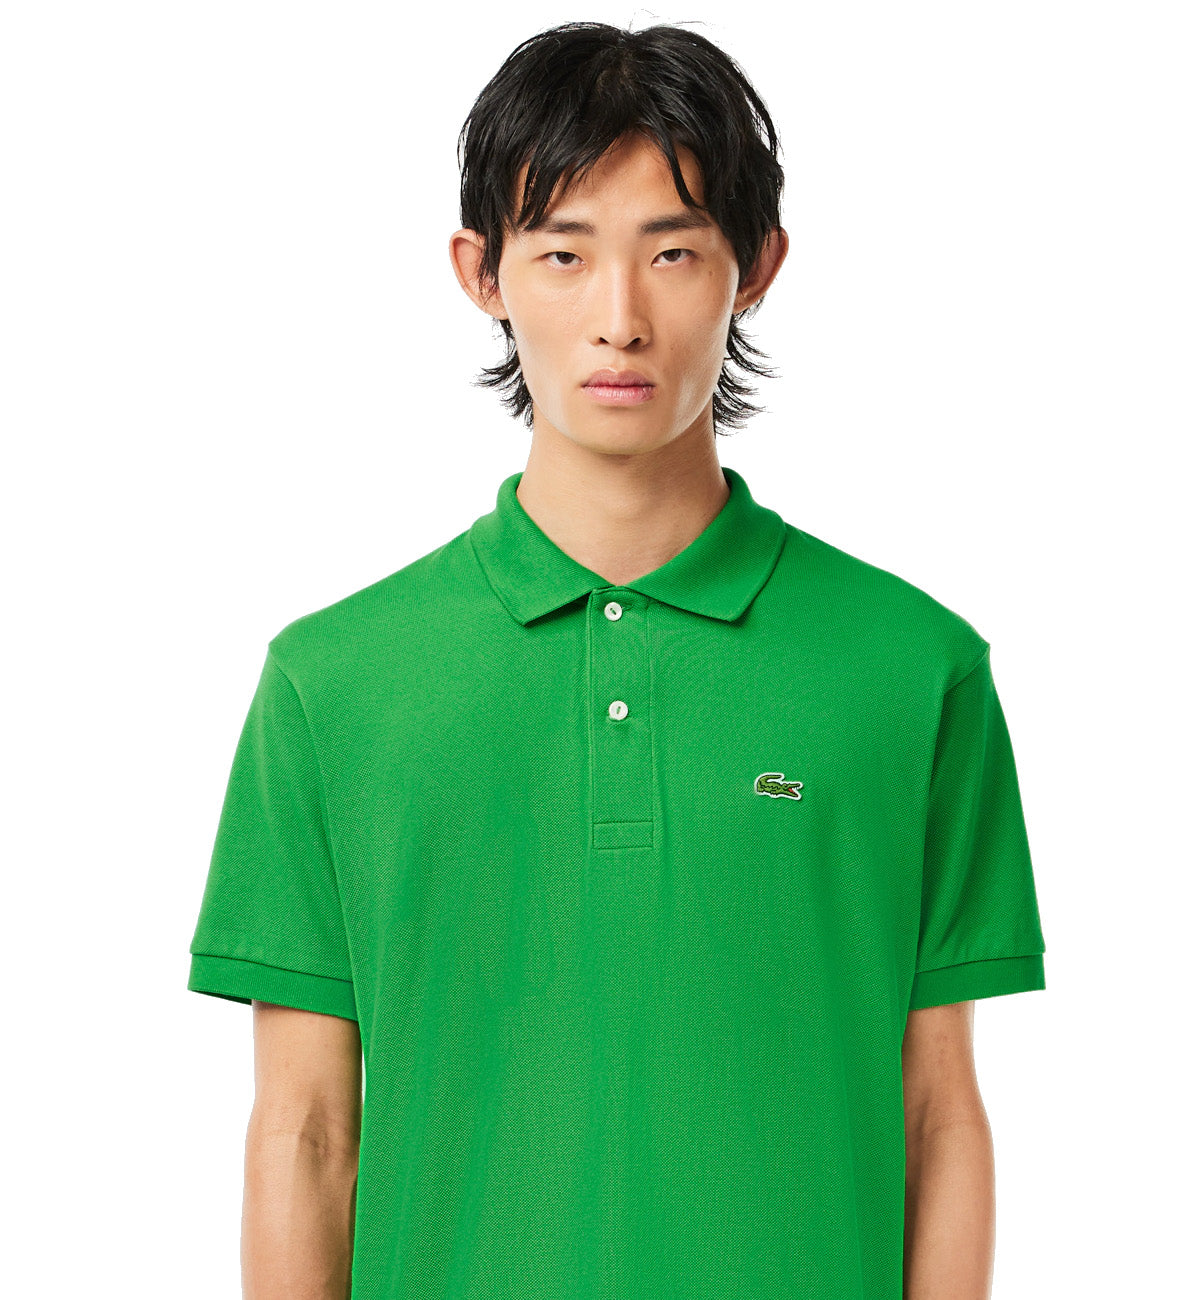 Lacoste Classic Fit Cotton Polo Shirt (Green)